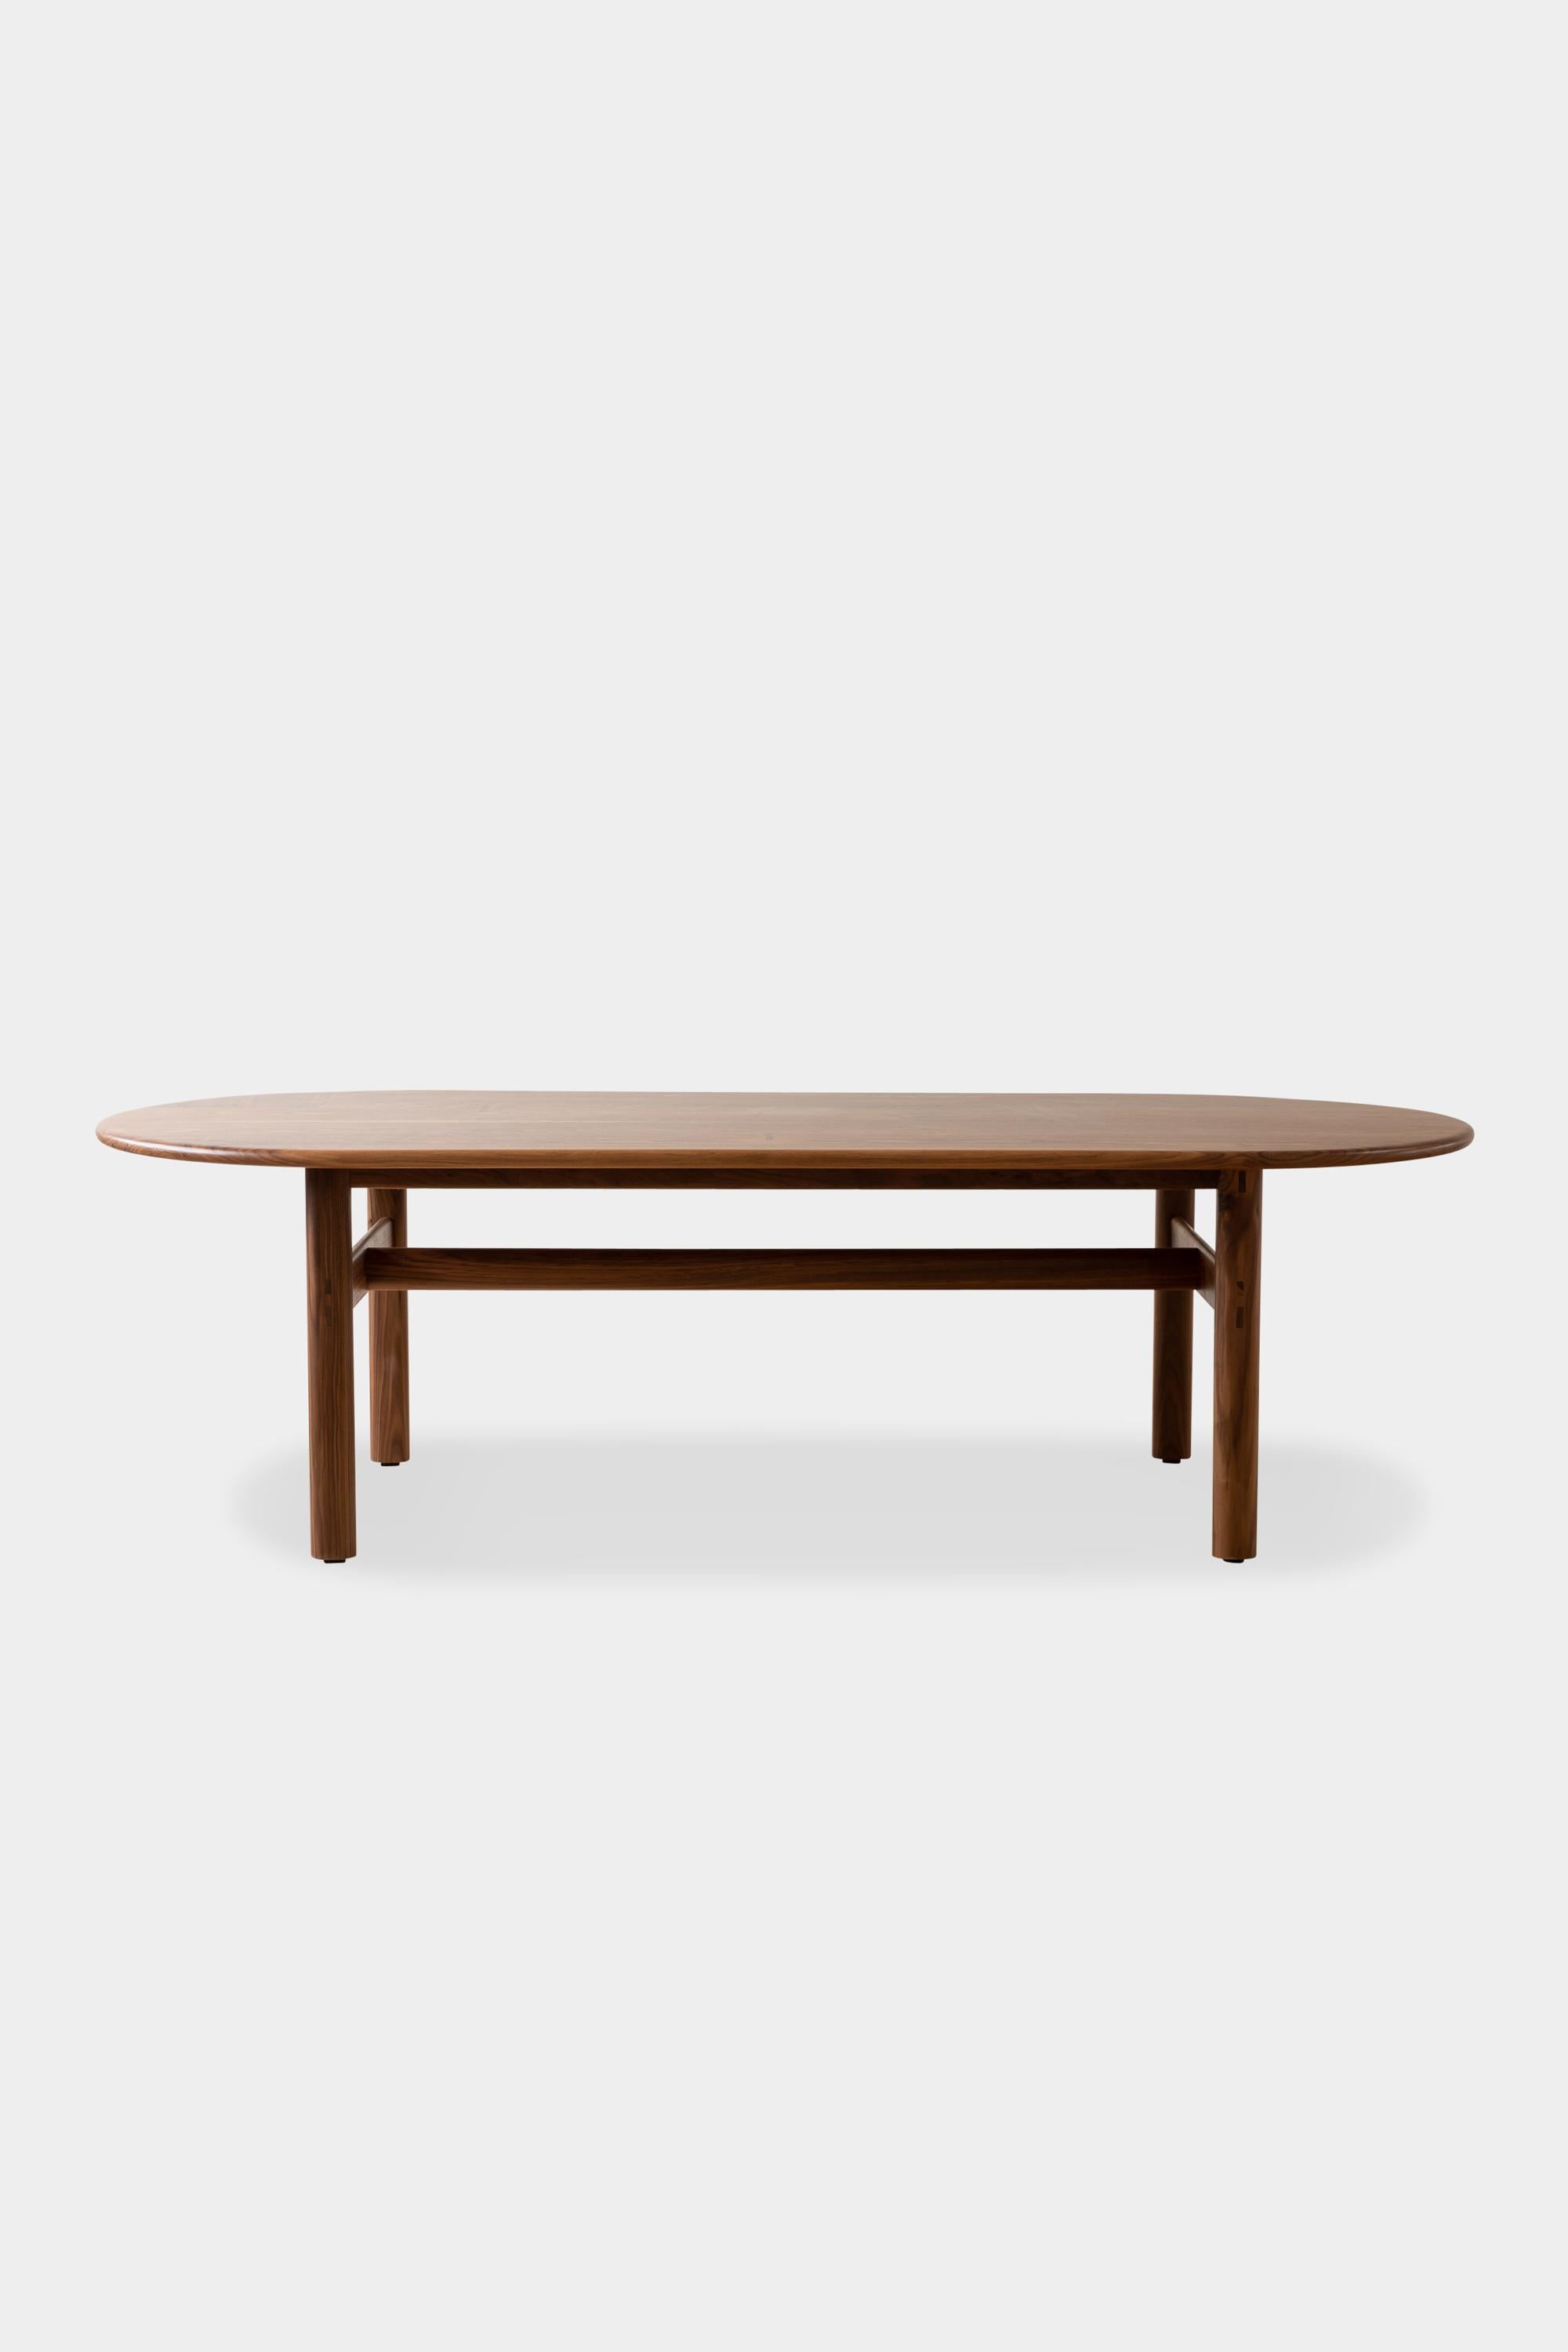 Handmade dining table with a simple trestle base. Solid wood tops feature individualized dutchman joints and unique orientations to accentuate and utilize the natural characteristics of each batch of lumber we source. This table is available in any